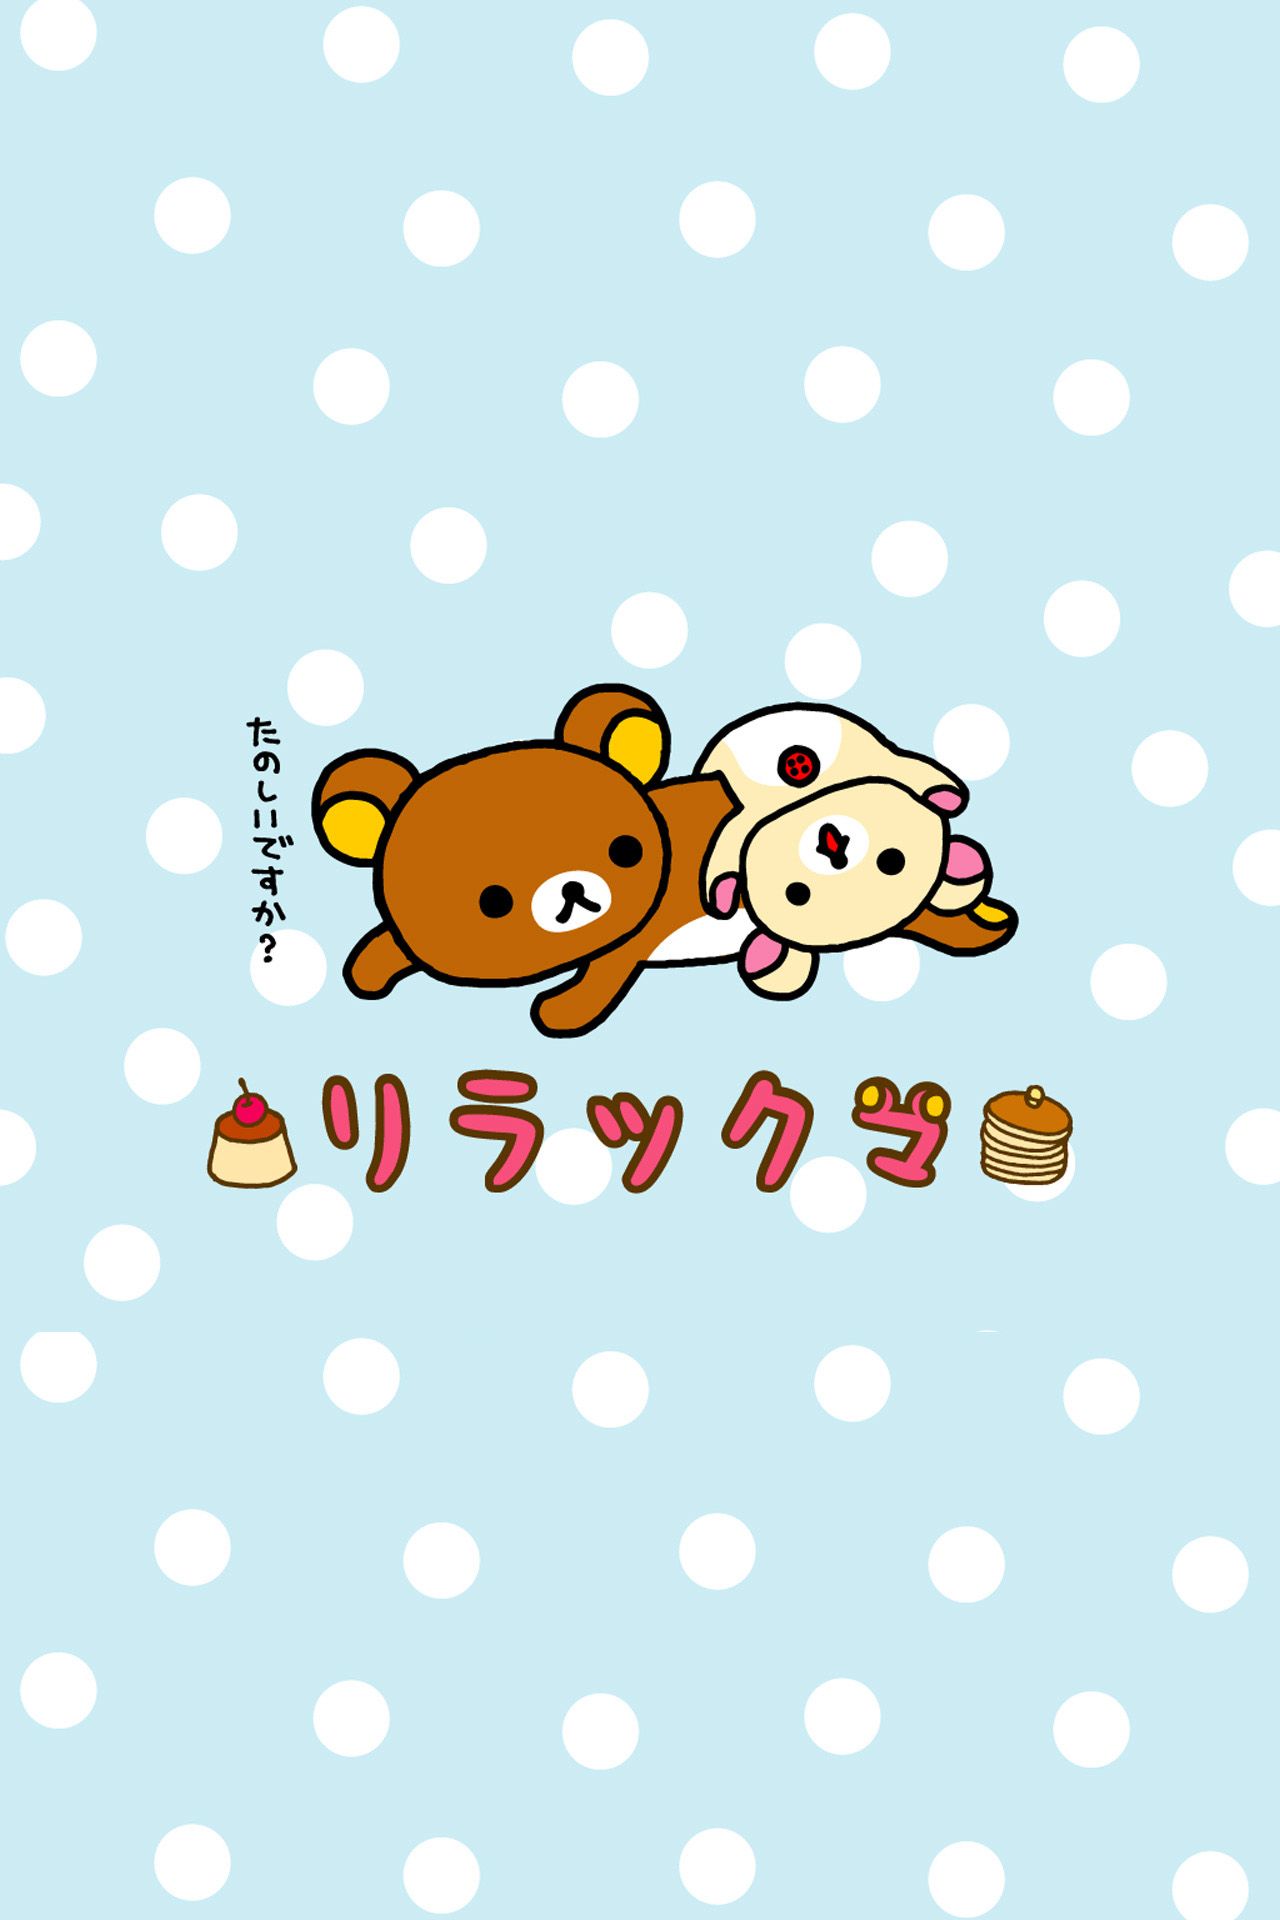 Rilakkuma Wallpaper. Free for iPhone and Galaxy from Lollimobile